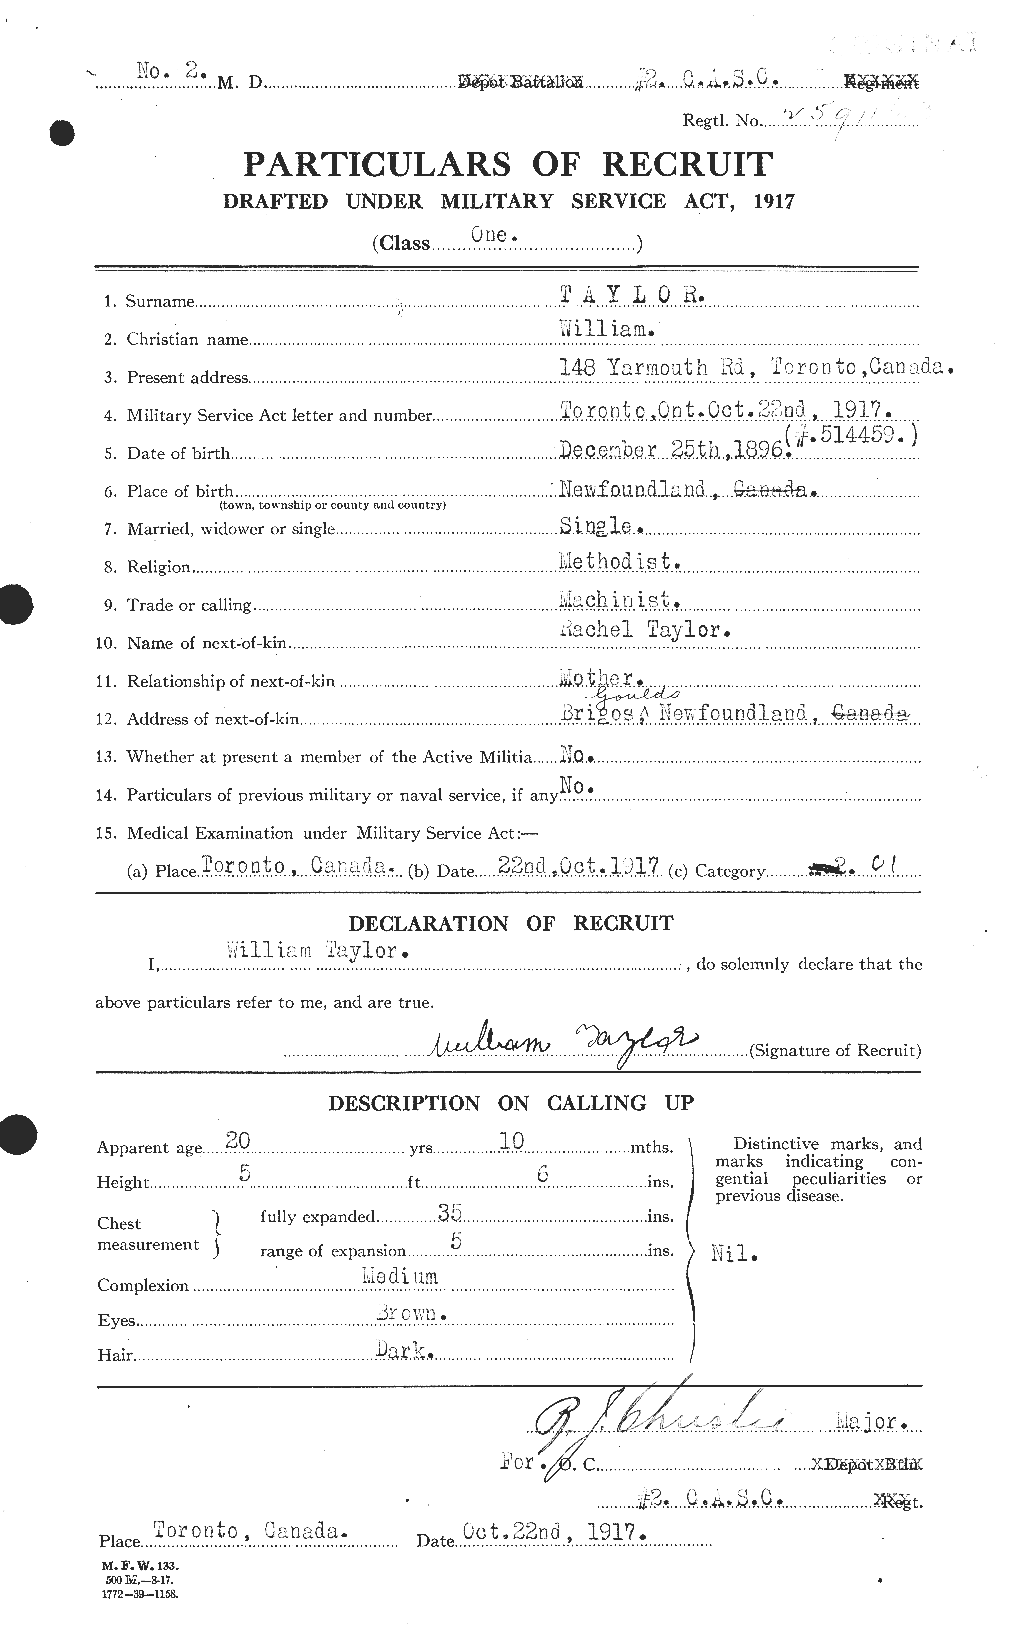 Personnel Records of the First World War - CEF 628136a